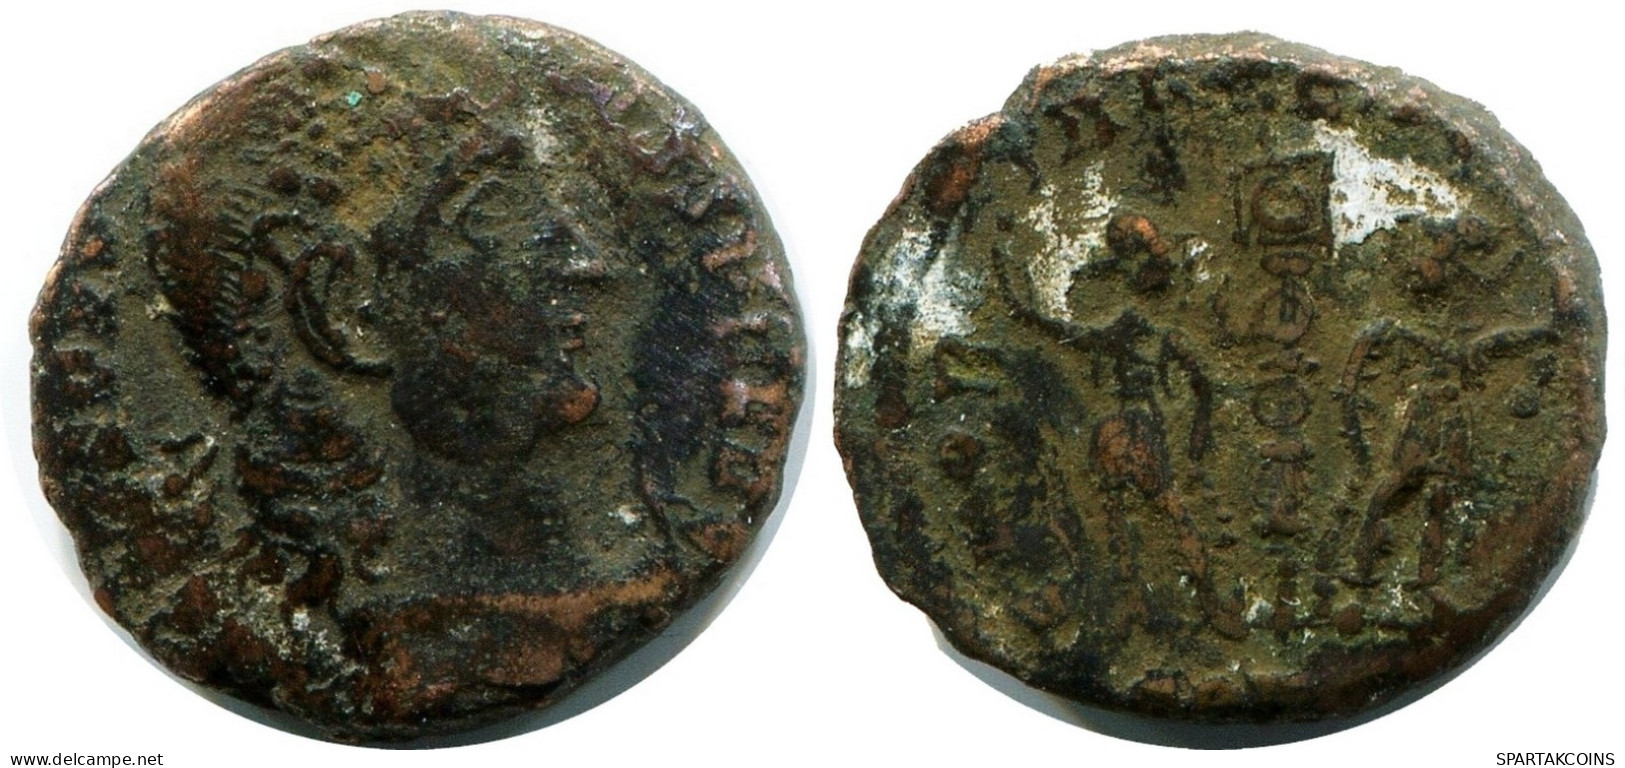 CONSTANS MINTED IN CONSTANTINOPLE FROM THE ROYAL ONTARIO MUSEUM #ANC11923.14.U.A - El Impero Christiano (307 / 363)